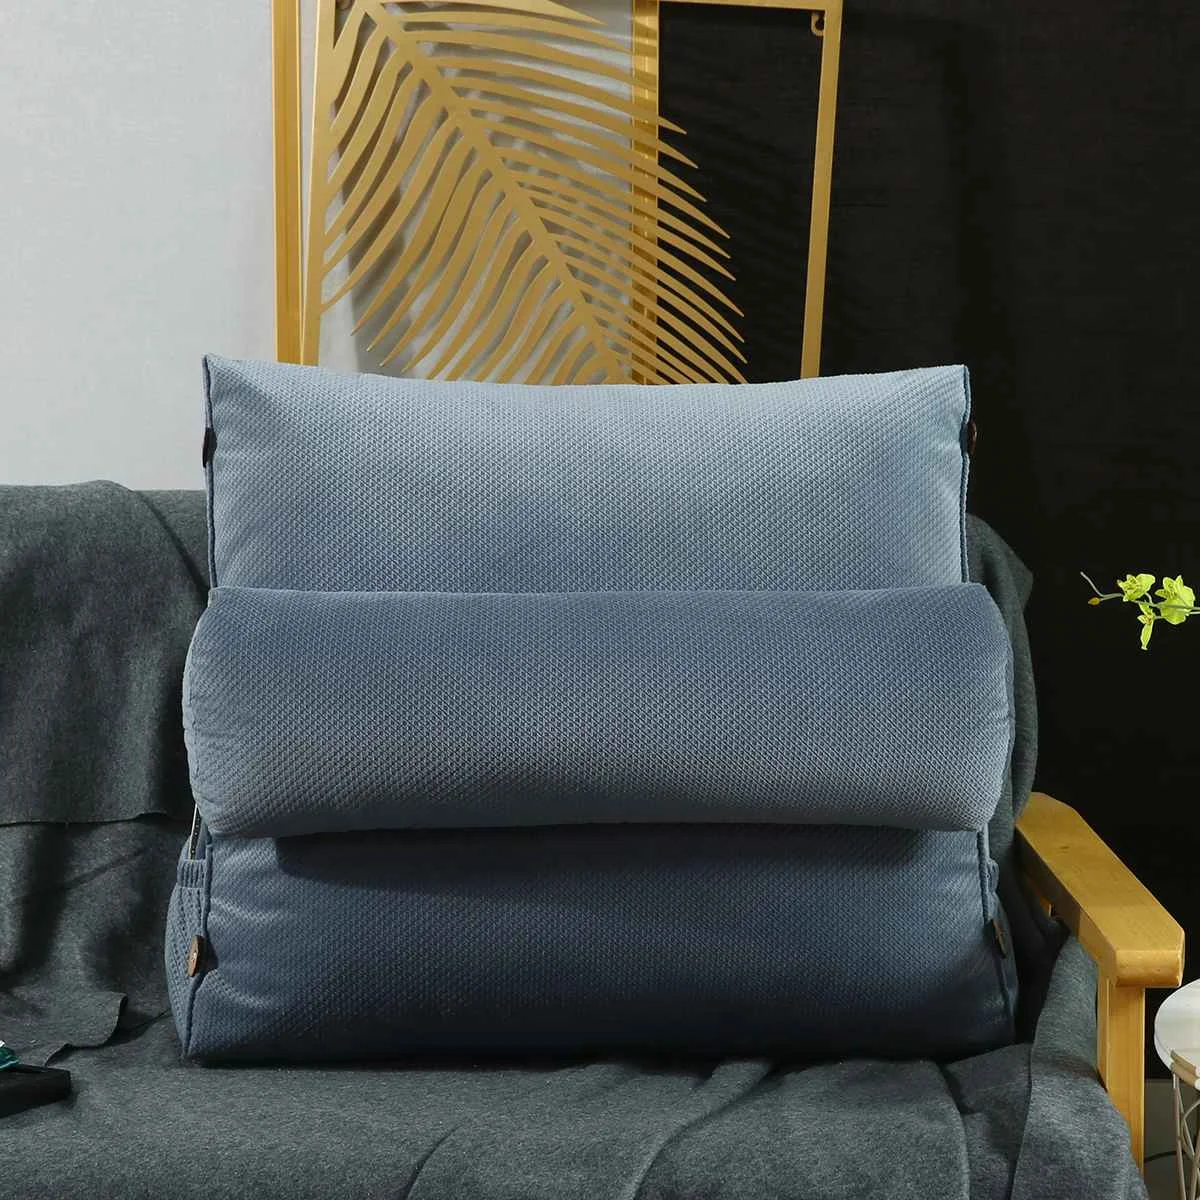 Sofa Triangular Cushion Multifunctional Chair Bedside Lumbar Removable  Office Chair Reading Living Room Pillow Home Decor Cojin - AliExpress